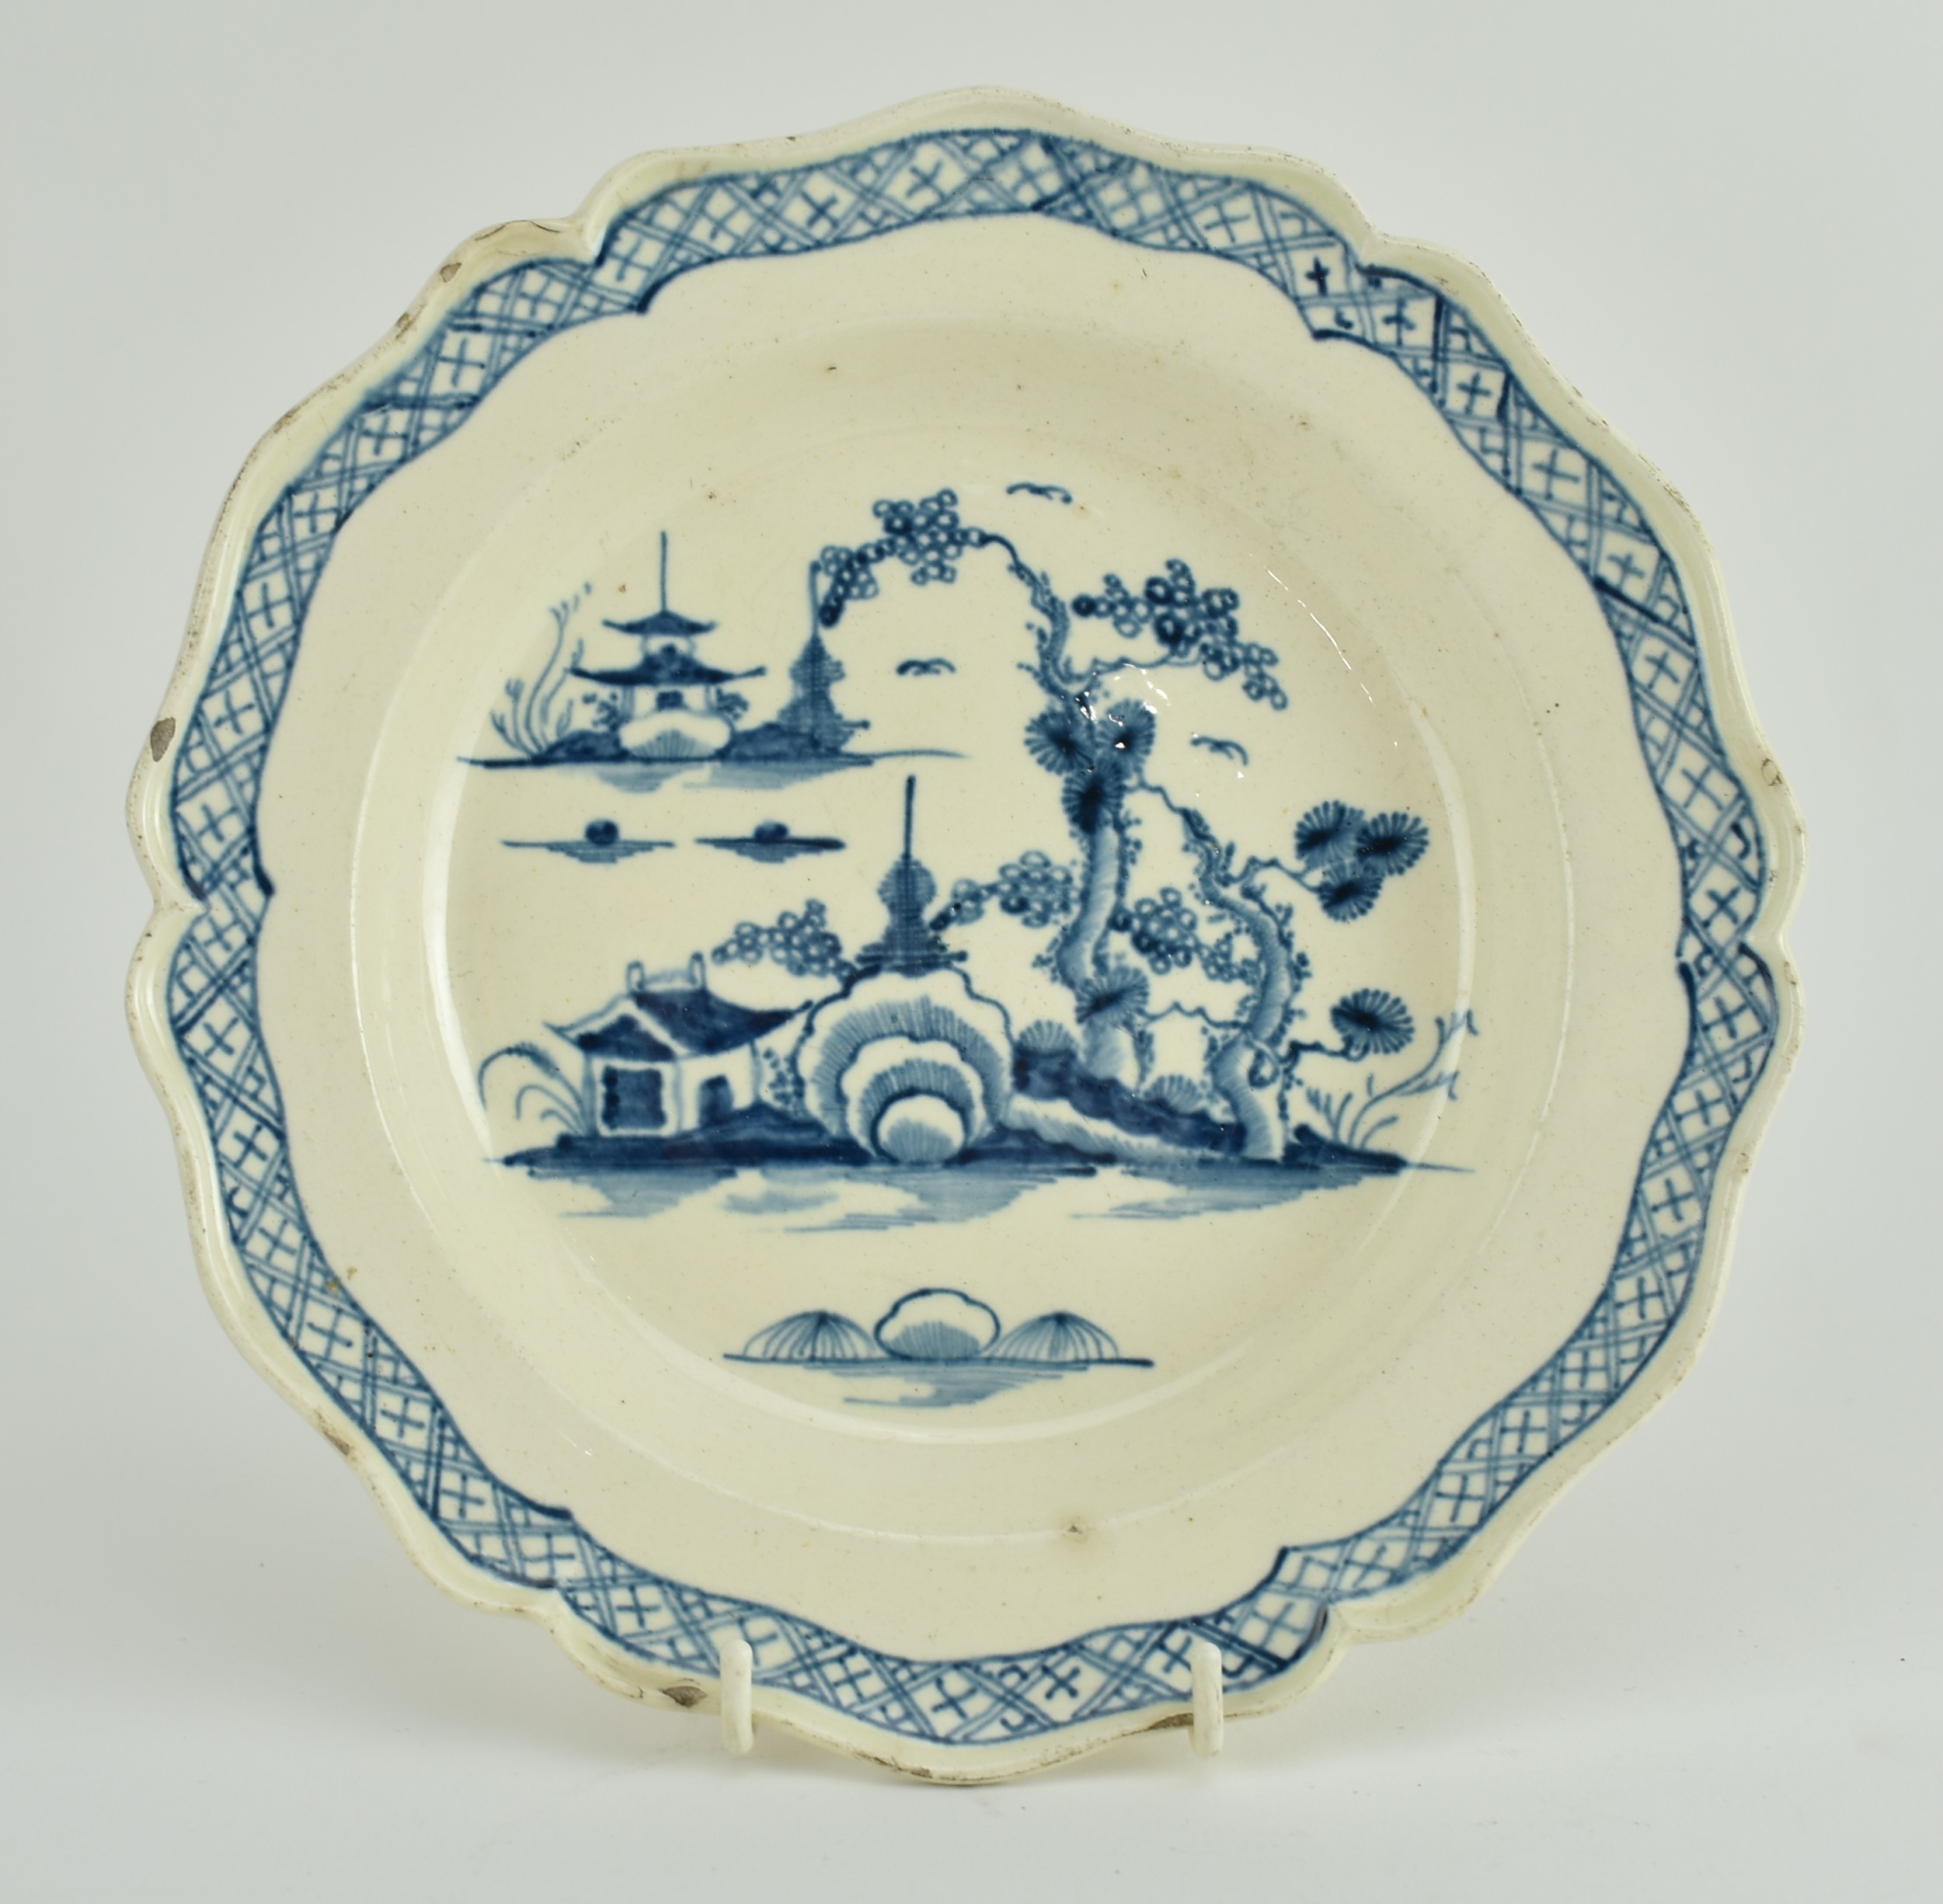 LATE 18TH CENTURY PEARLWARE BLUE AND WHITE CABINET PLATE - Image 2 of 5